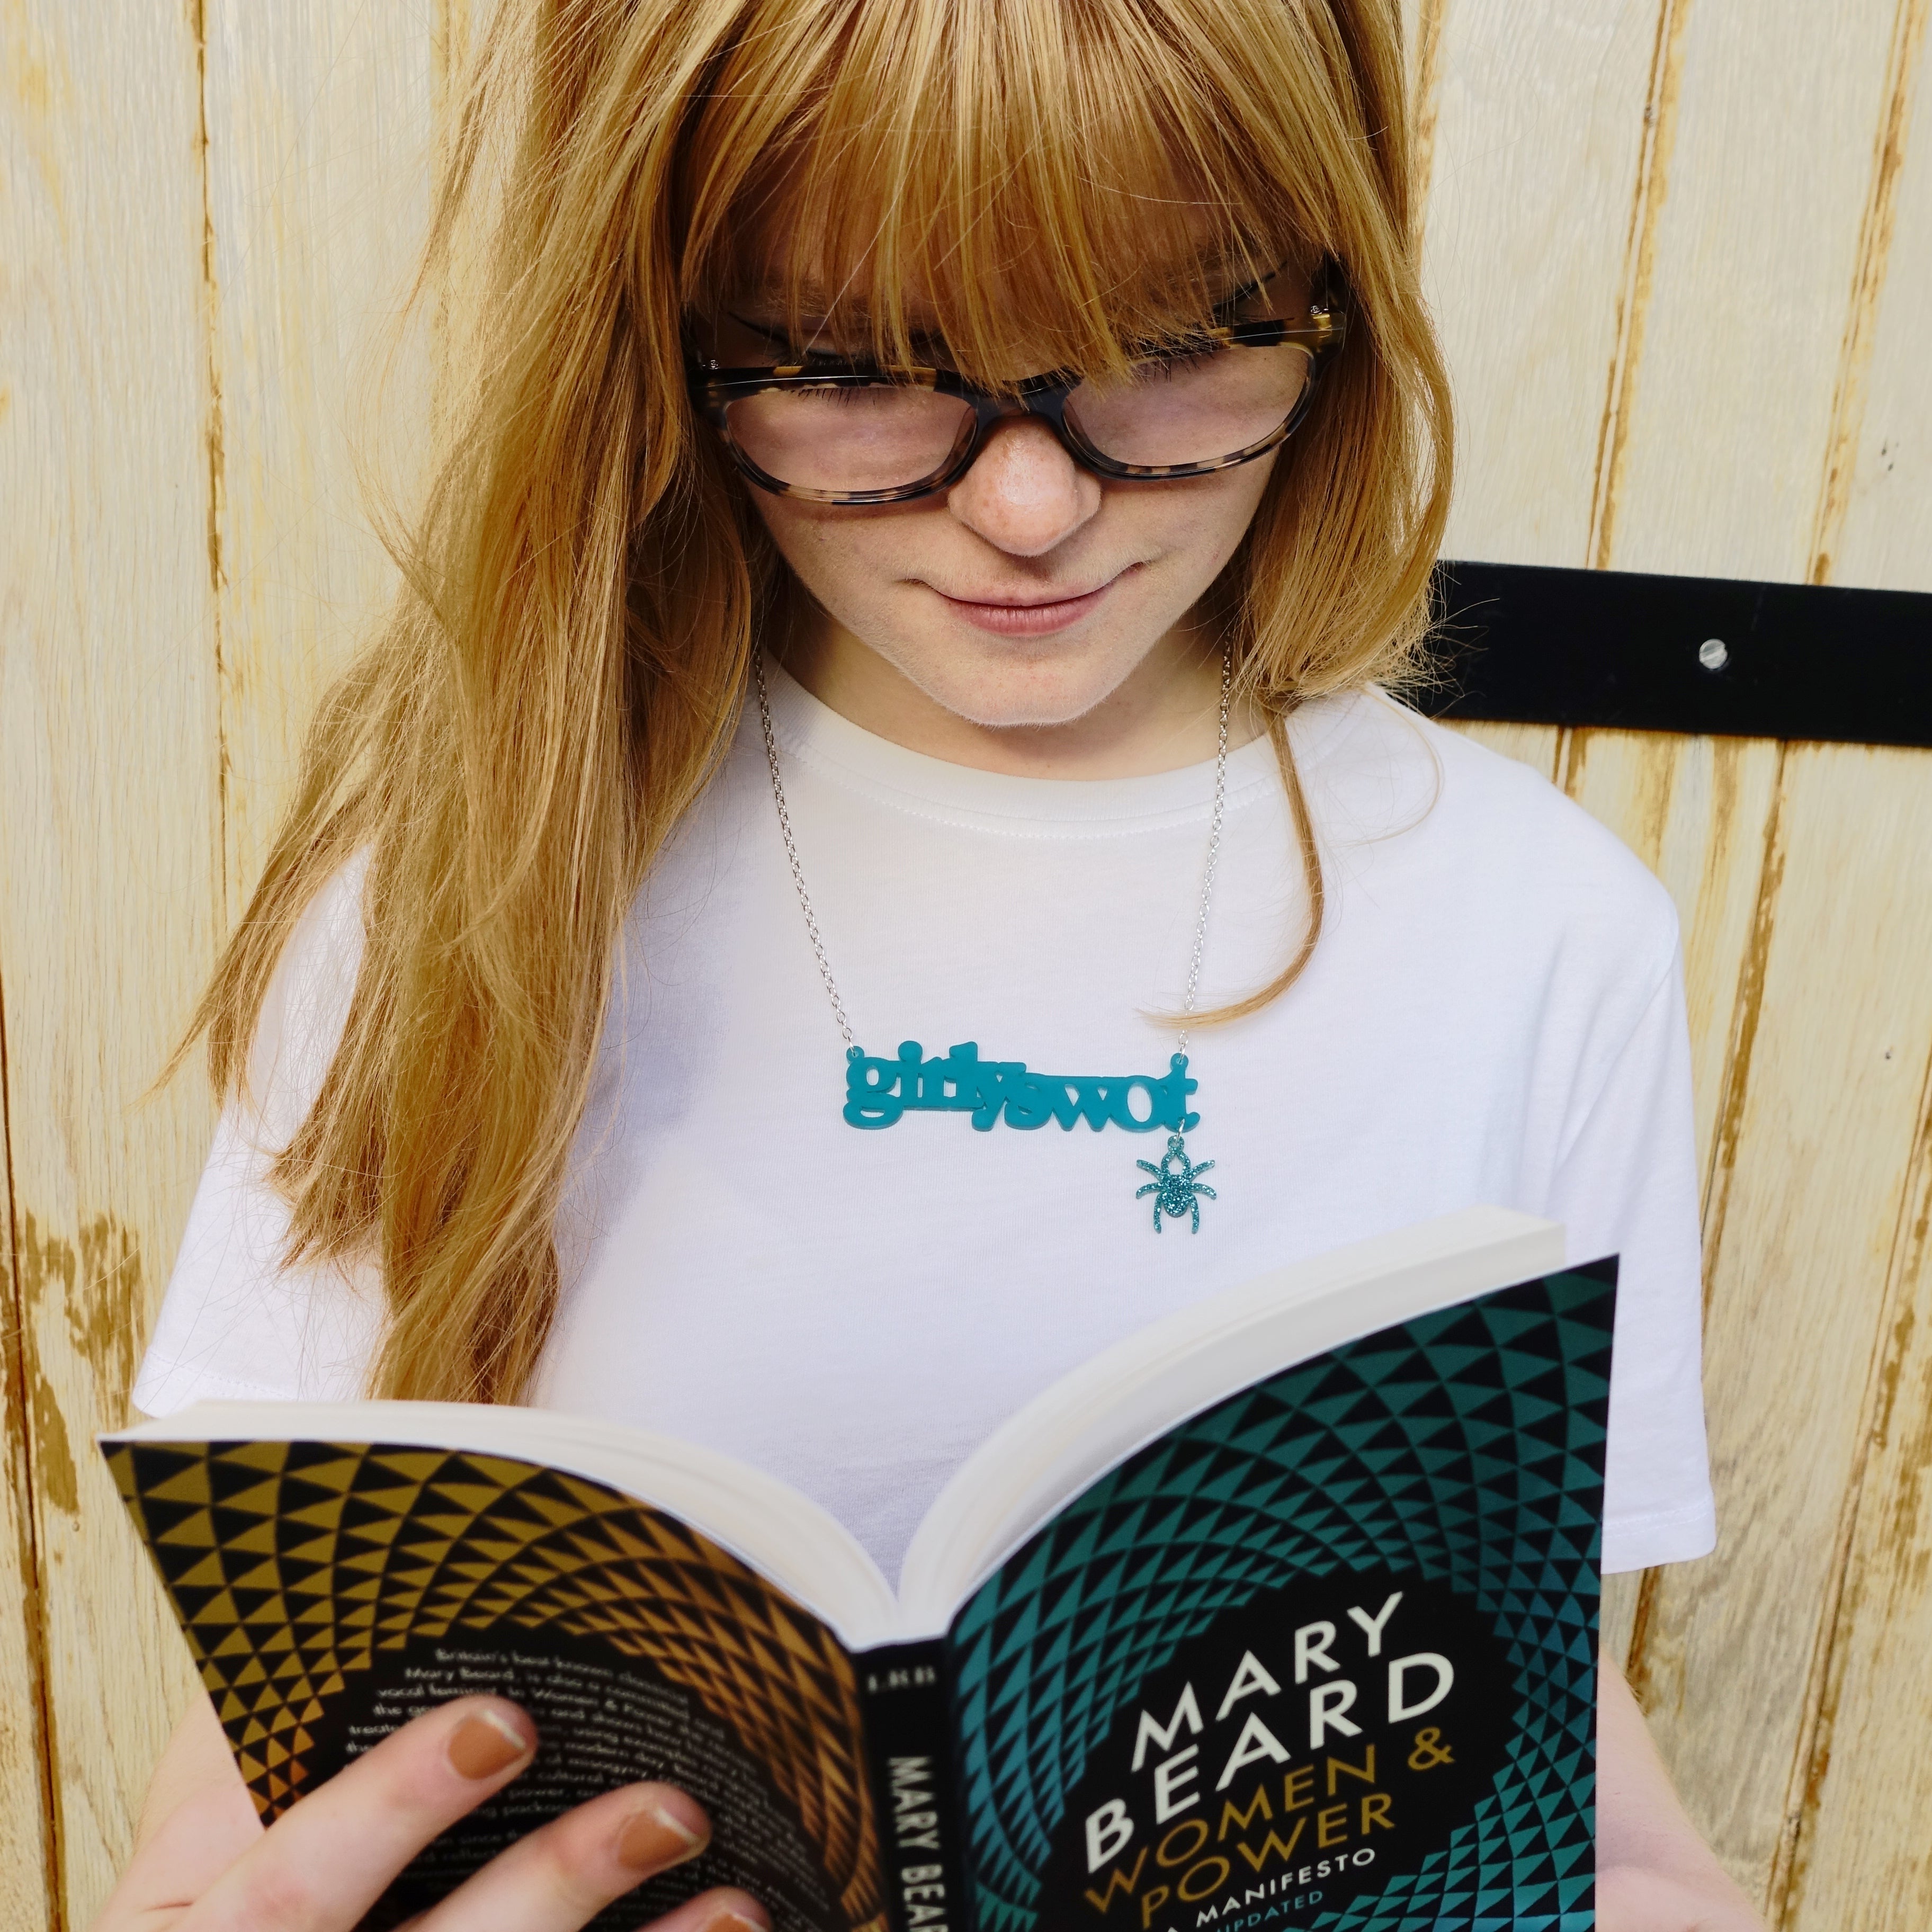 Eliza wears teal Girly swot necklace with hanging Lady Hale spider and reads Mary Beard's Women & Power. Girly swots unite! 